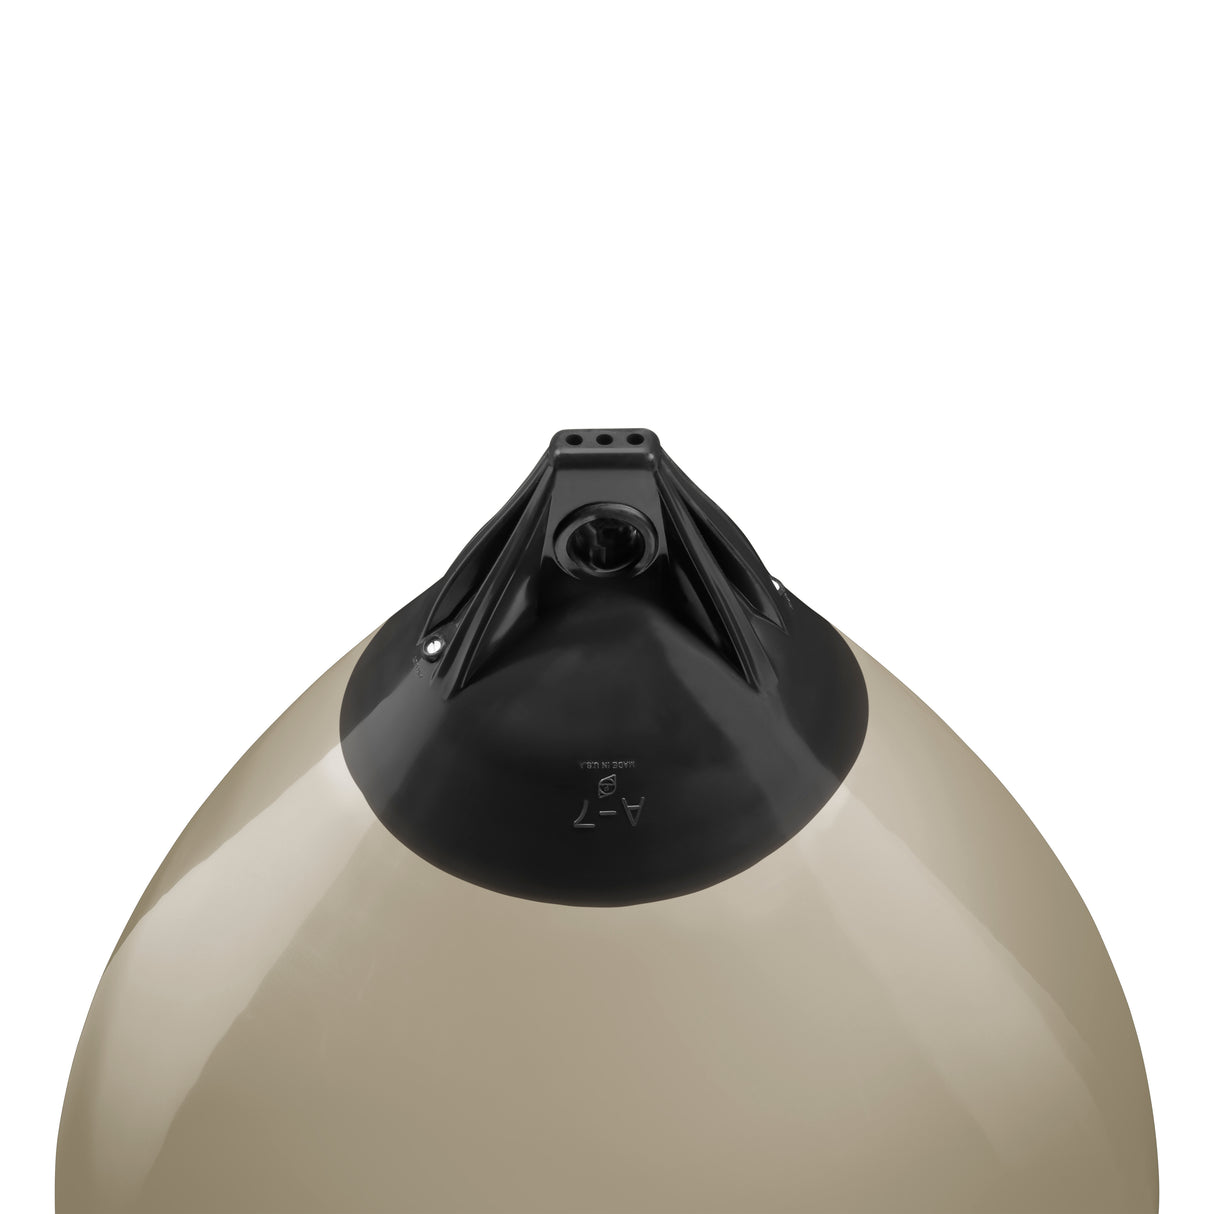 Sand buoy with Black-Top, Polyform A-7 angled shot